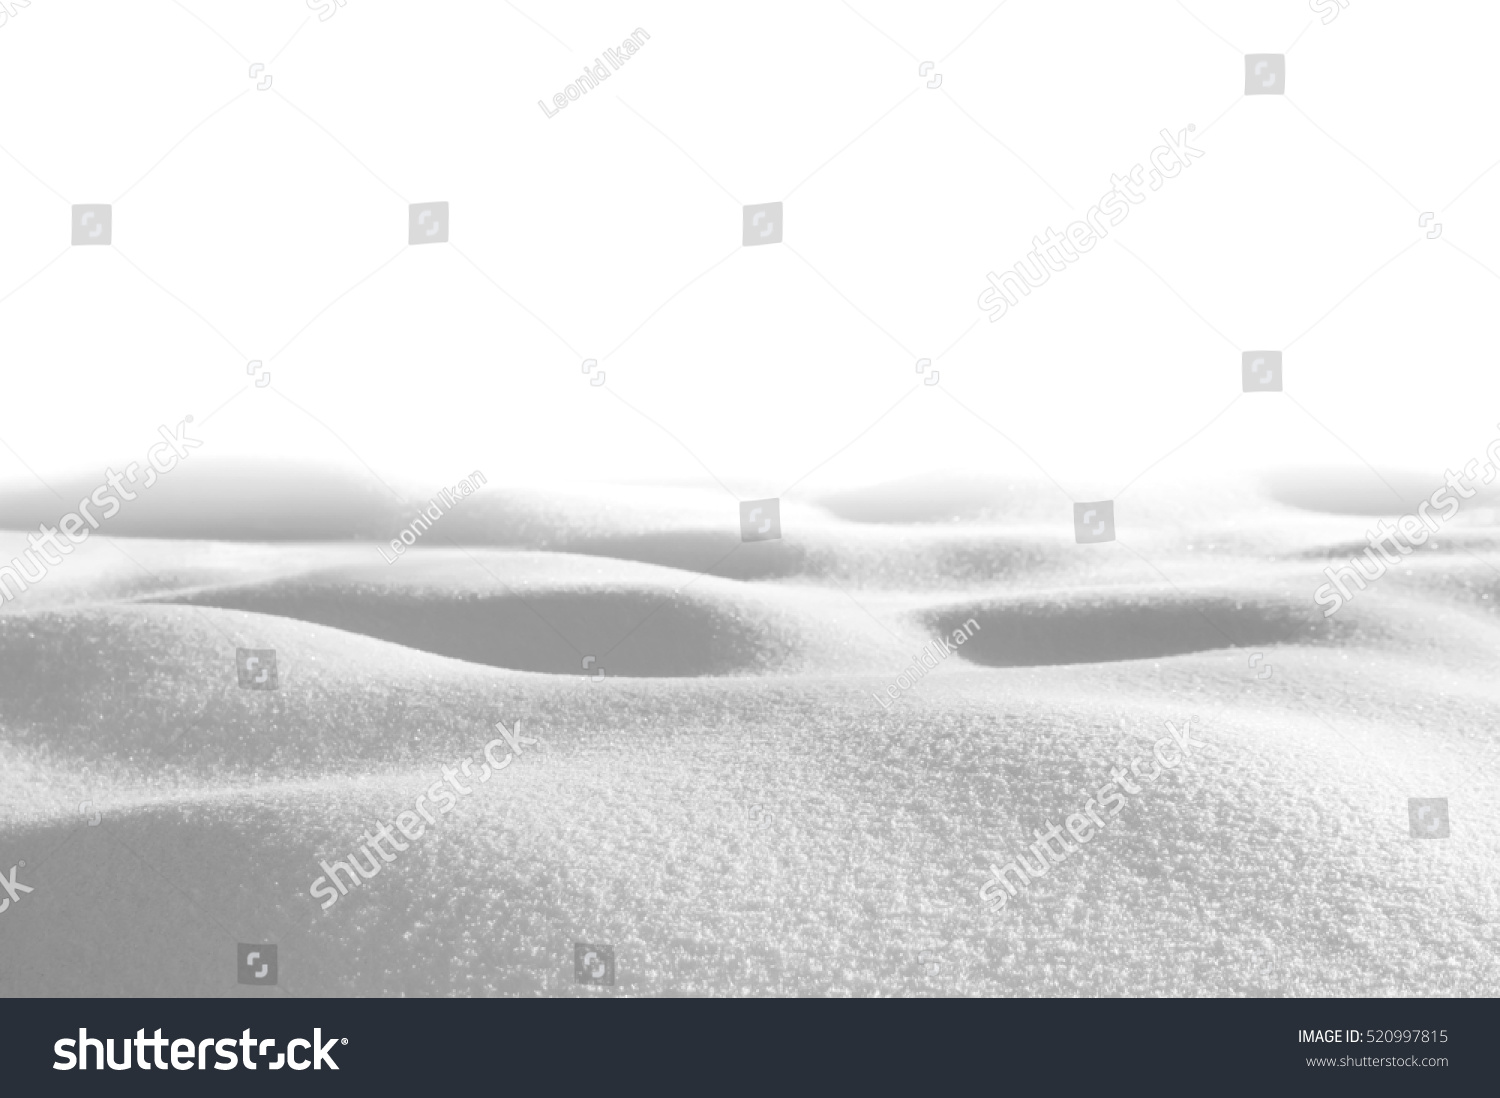 Snow drifts isolated on white background in shades of gray #520997815